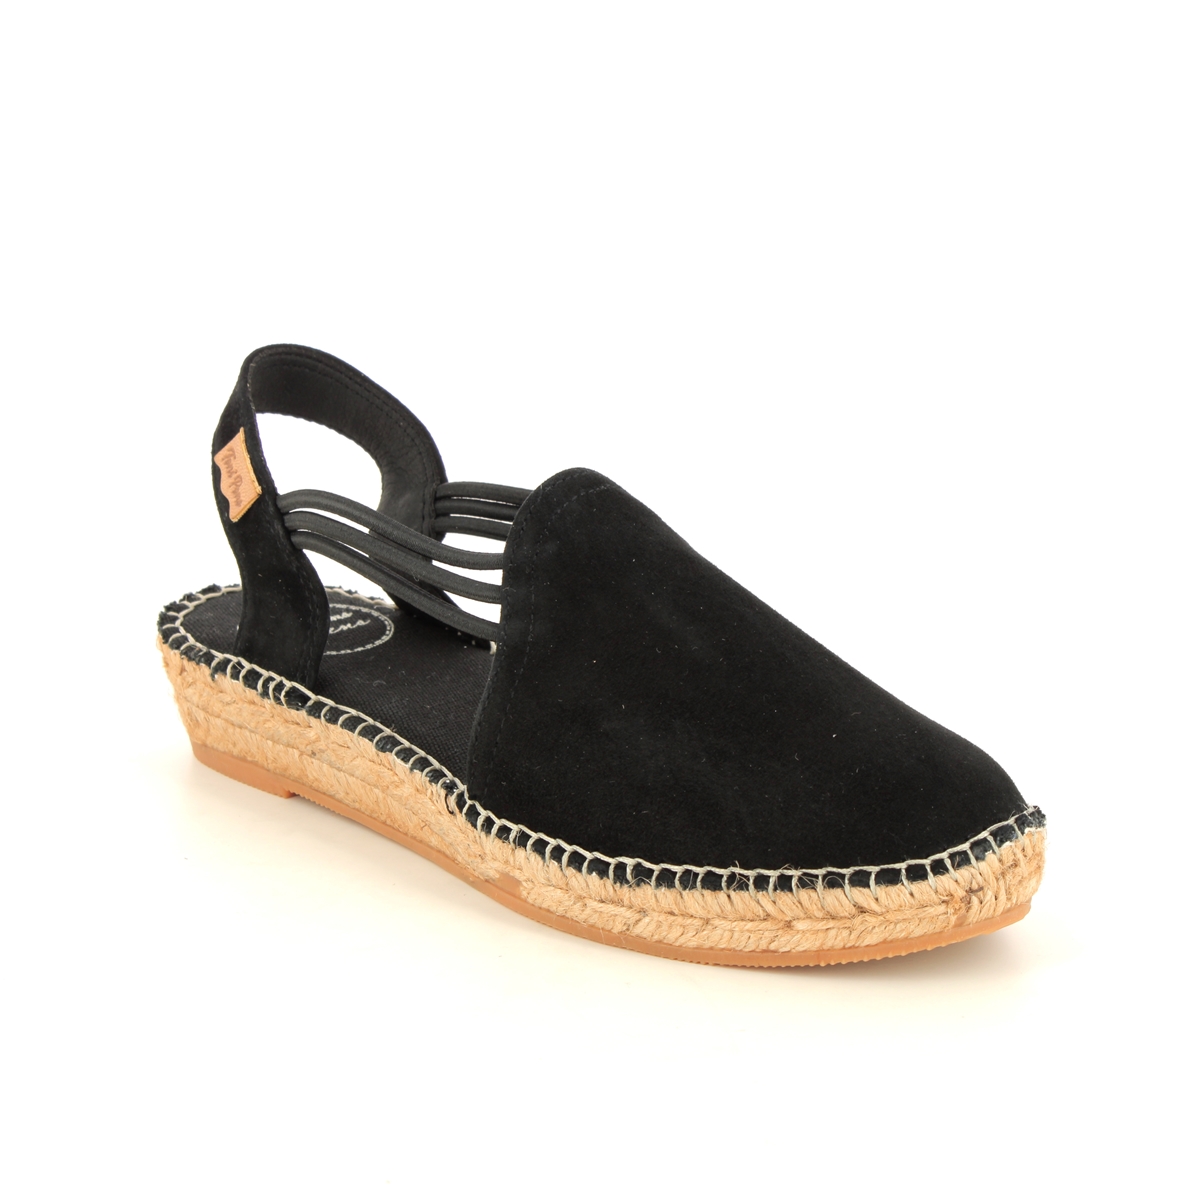 Toni Pons Nuria Black Suede Womens Espadrilles 0110-34 in a Plain Leather in Size 41